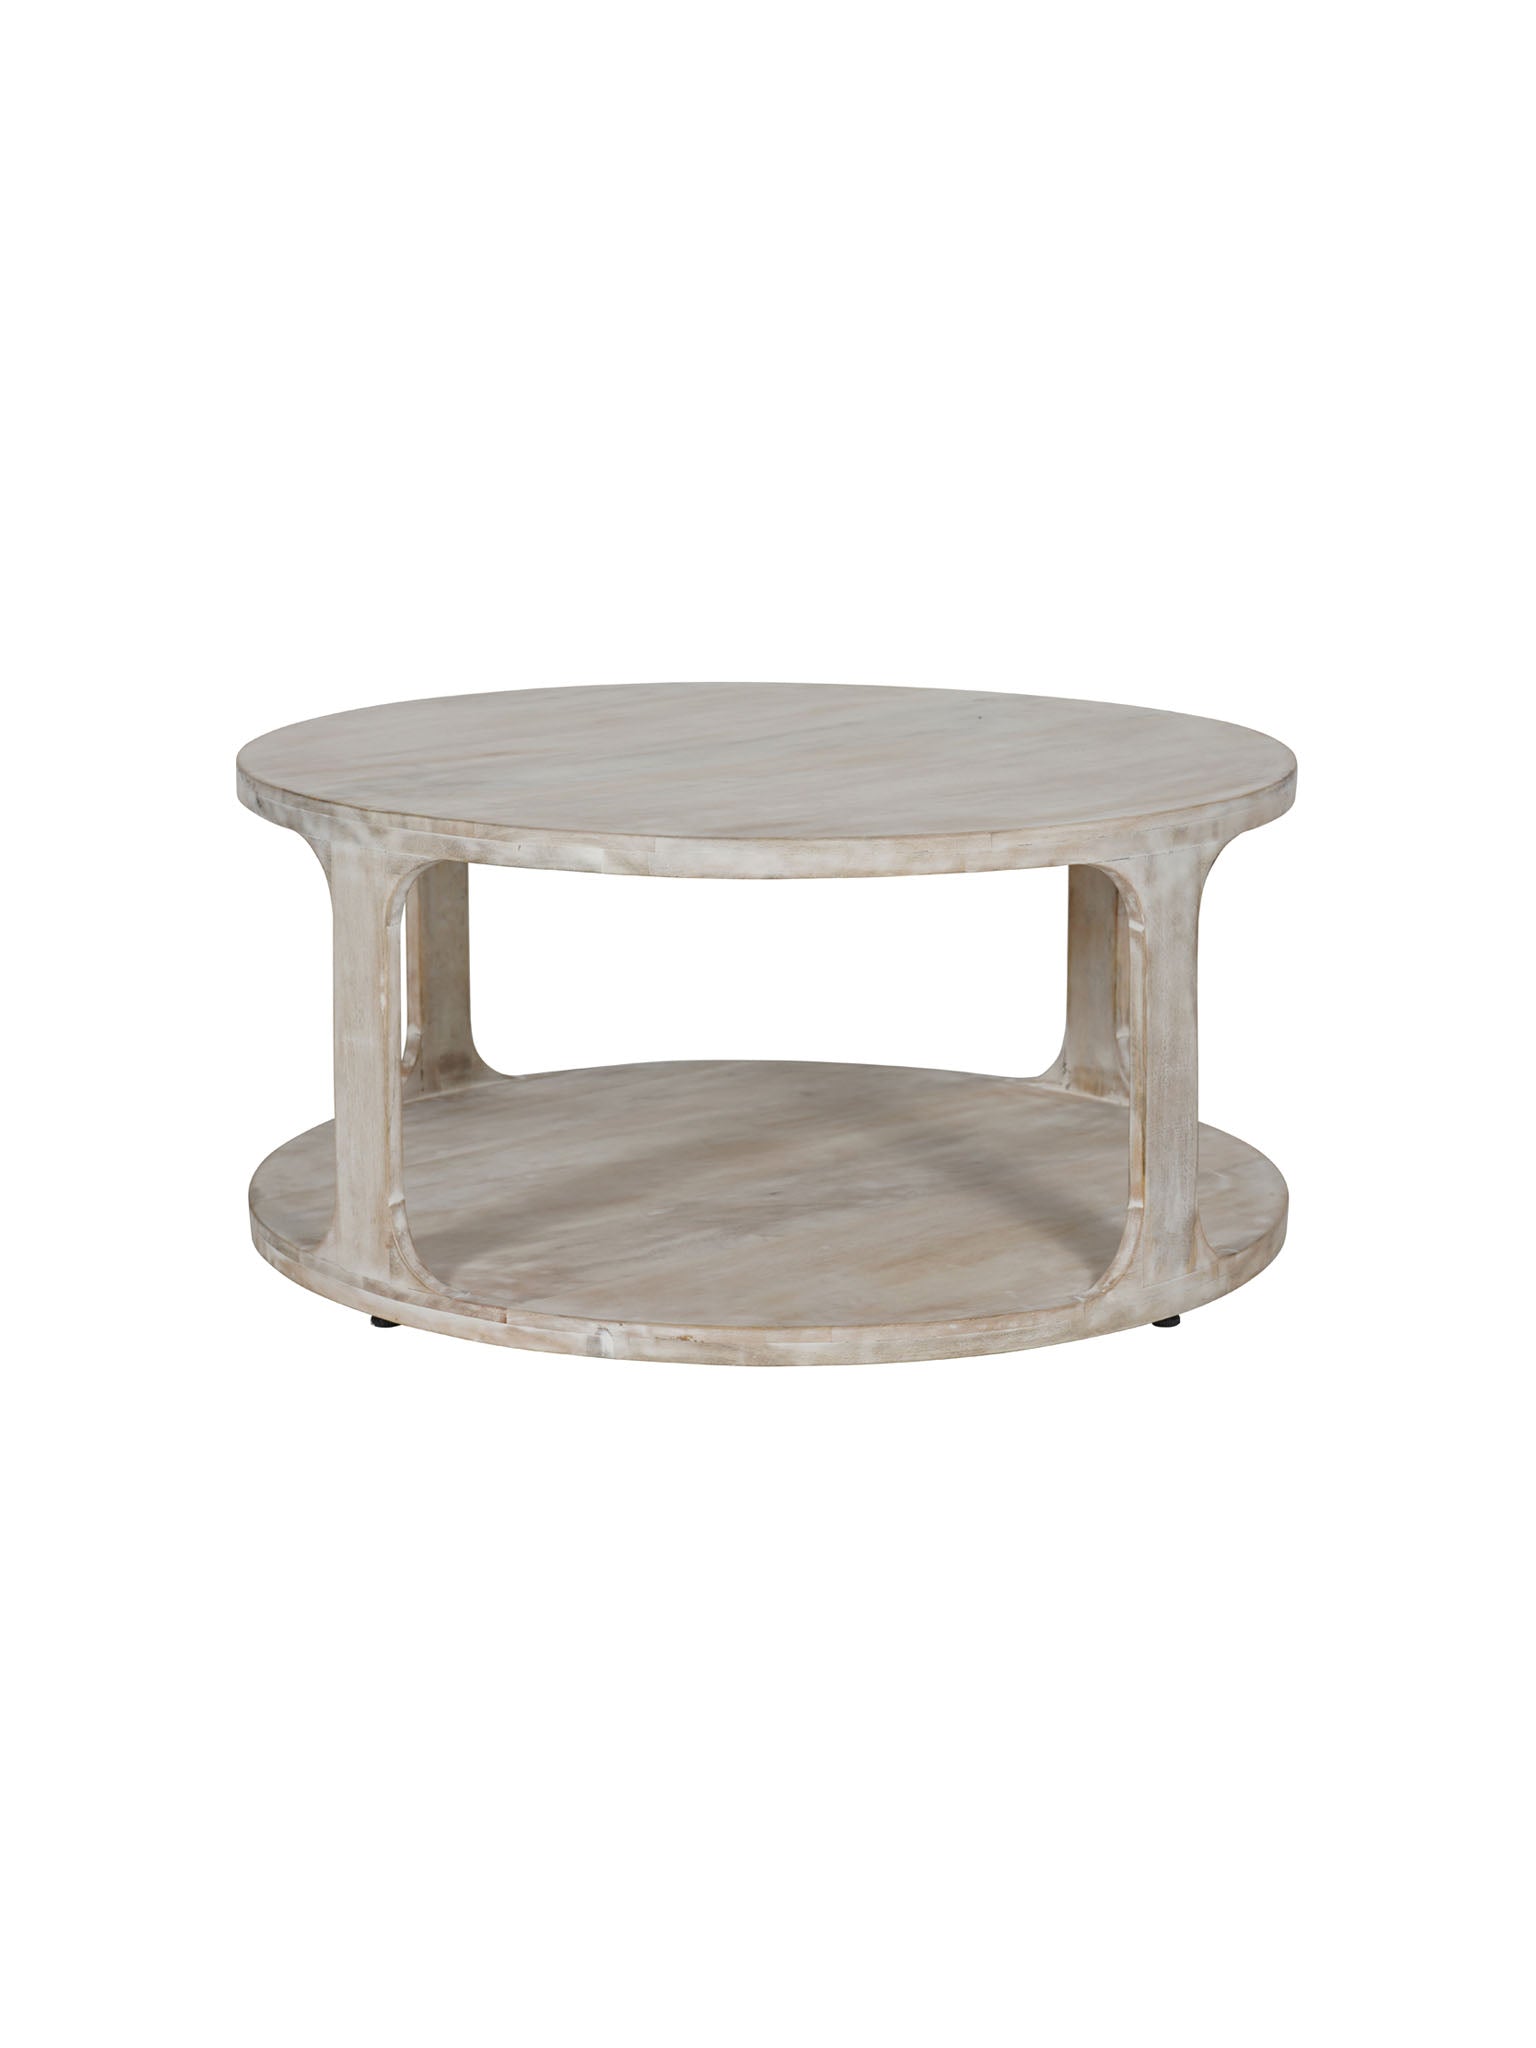 Solid Carved Wooden Coffee Table in Whitewash Finish